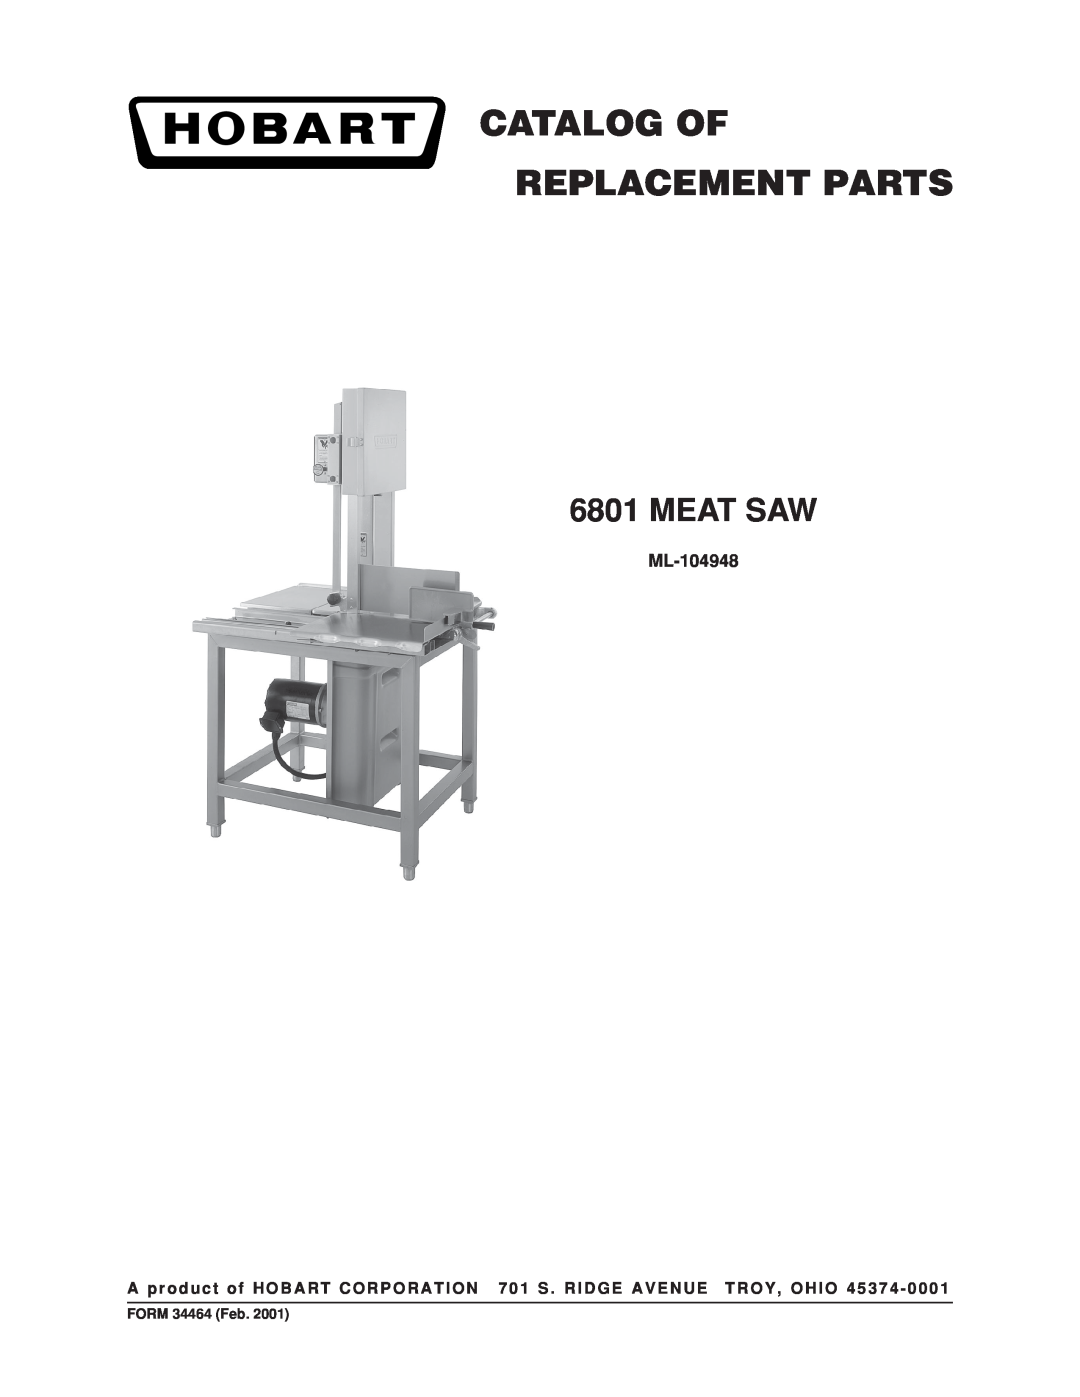 Hobart 6801 manual FORM 34464 Feb, Catalog Of Replacement Parts, Meat Saw, ML-104948 